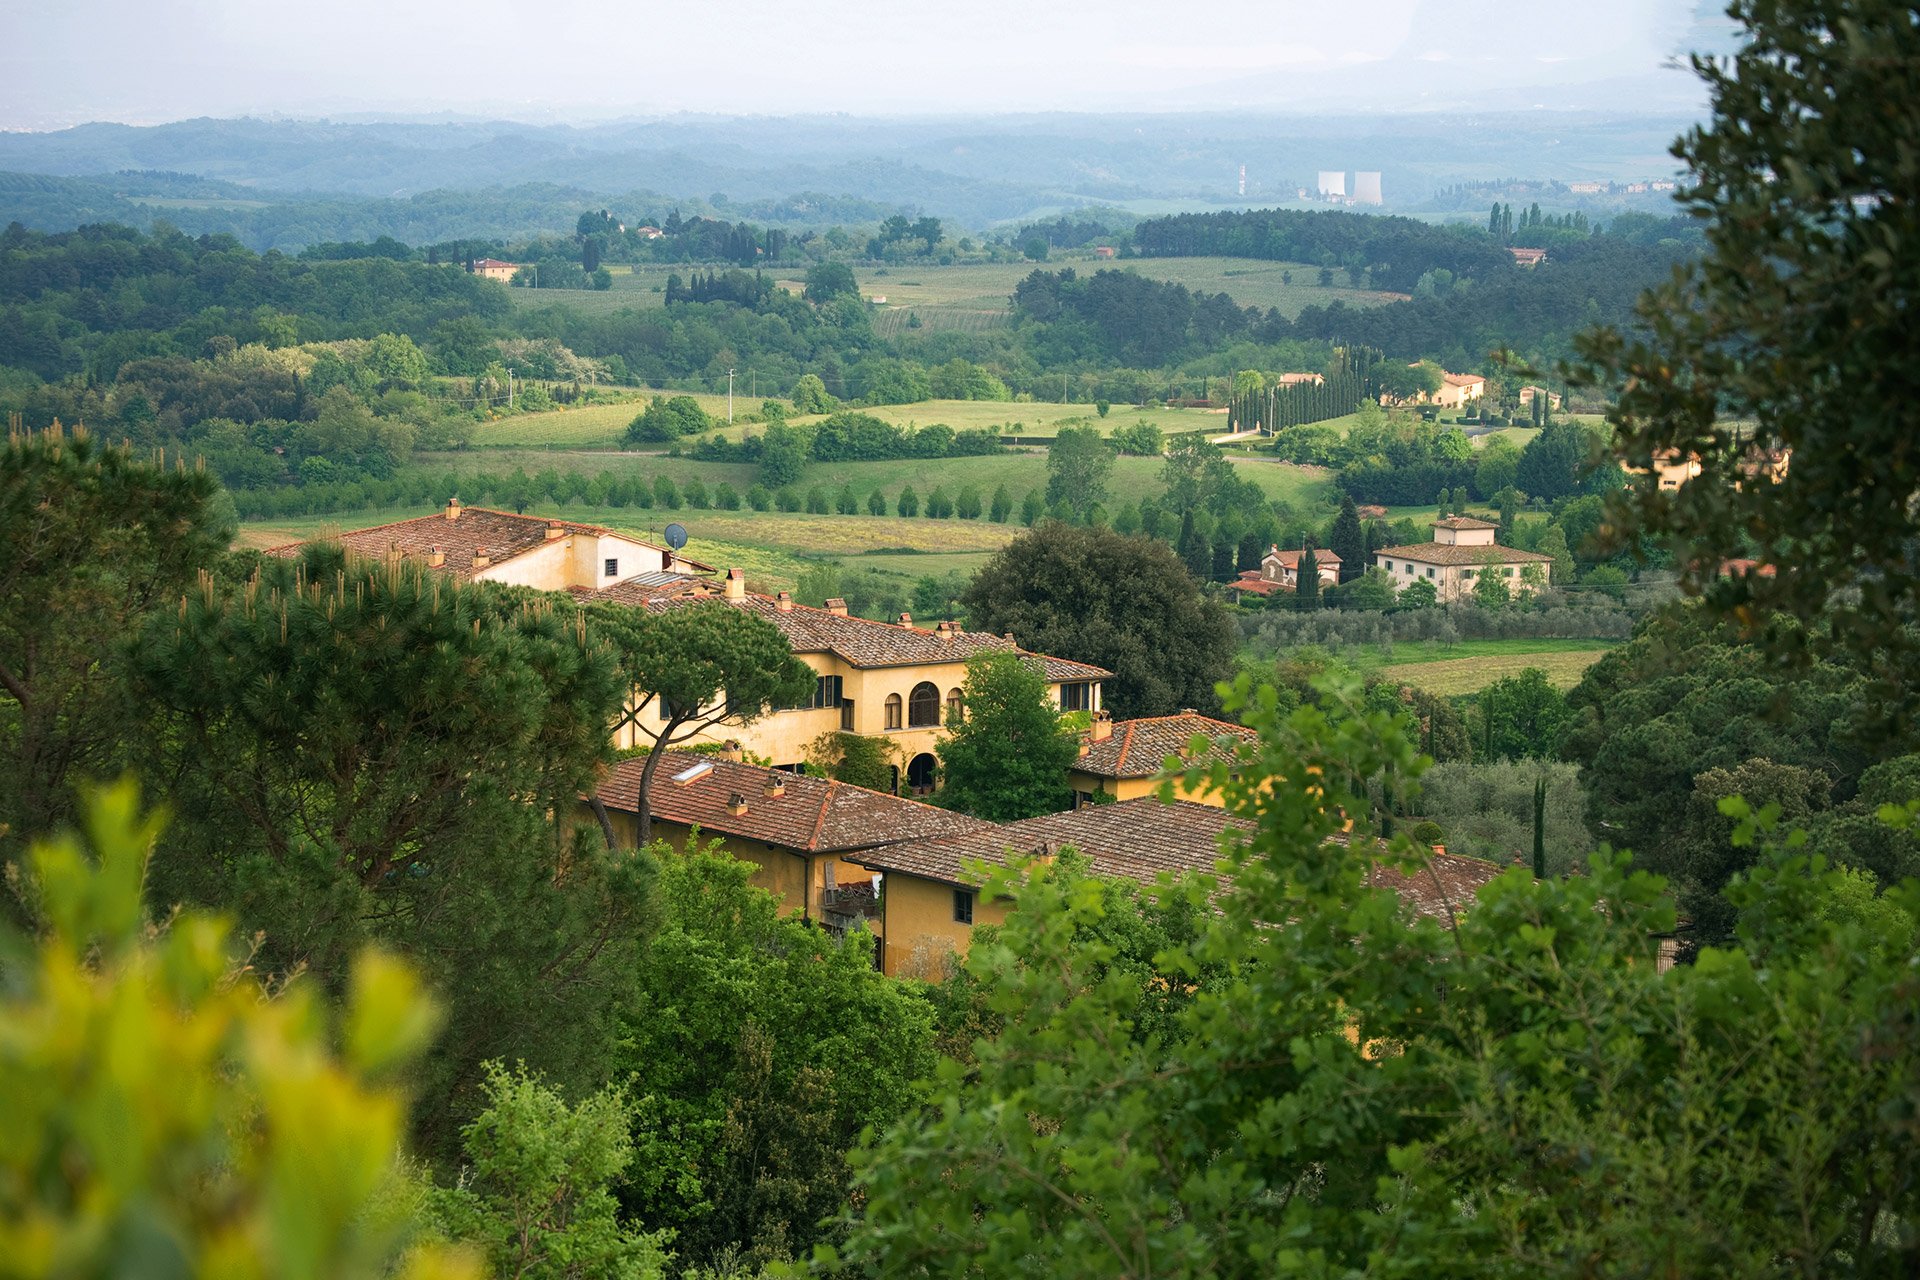 The beauty of the Tuscan landscape.